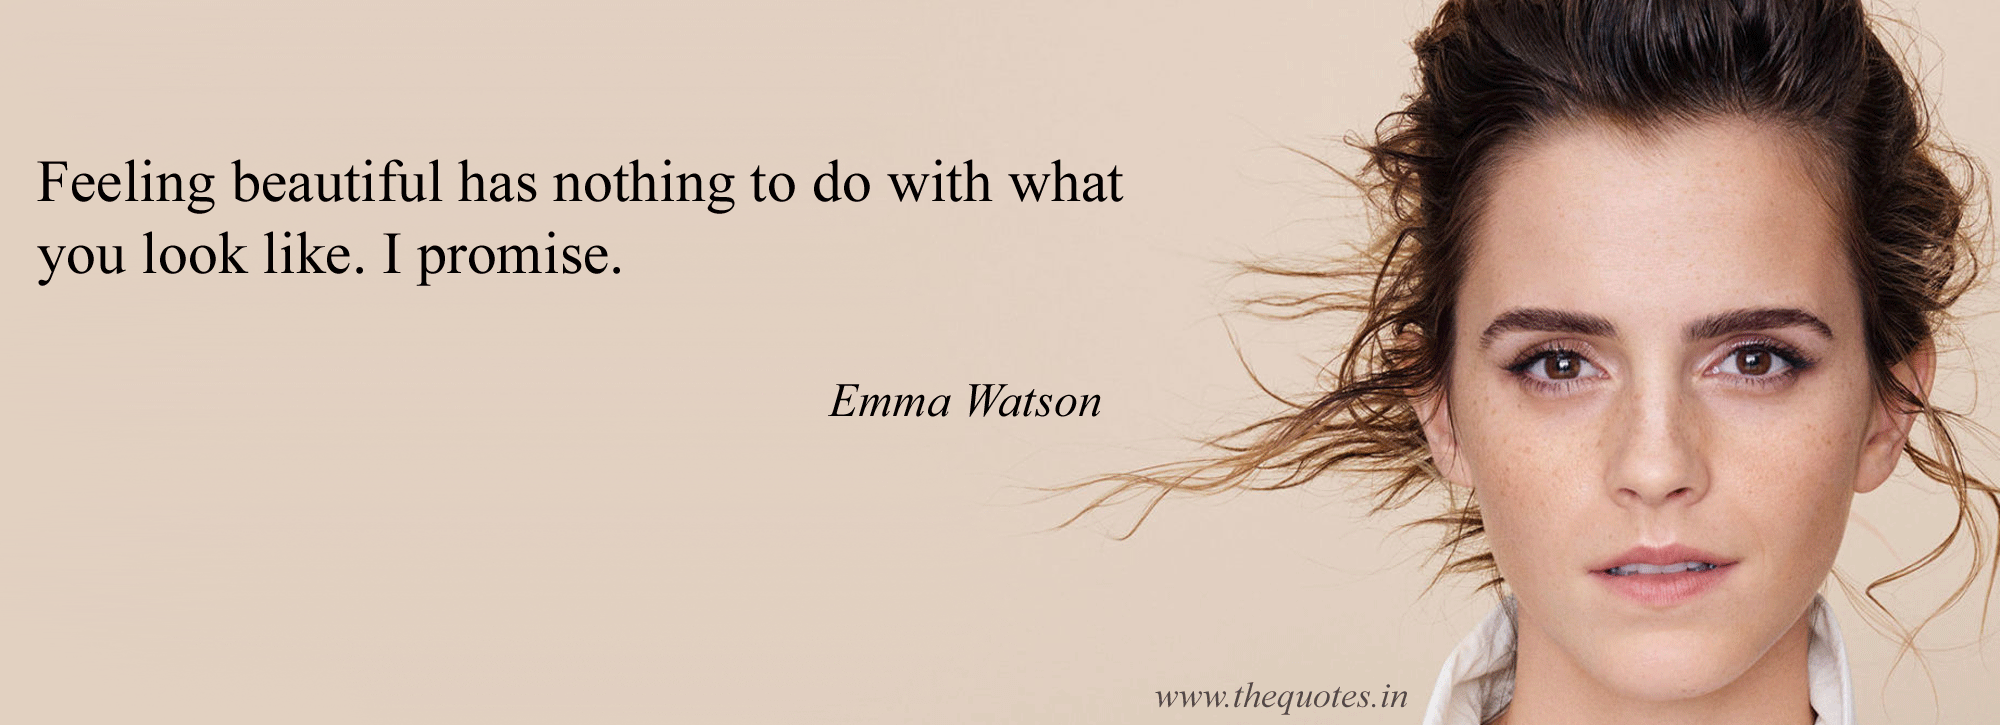 Emma Watson Image With Quotes Watson Age